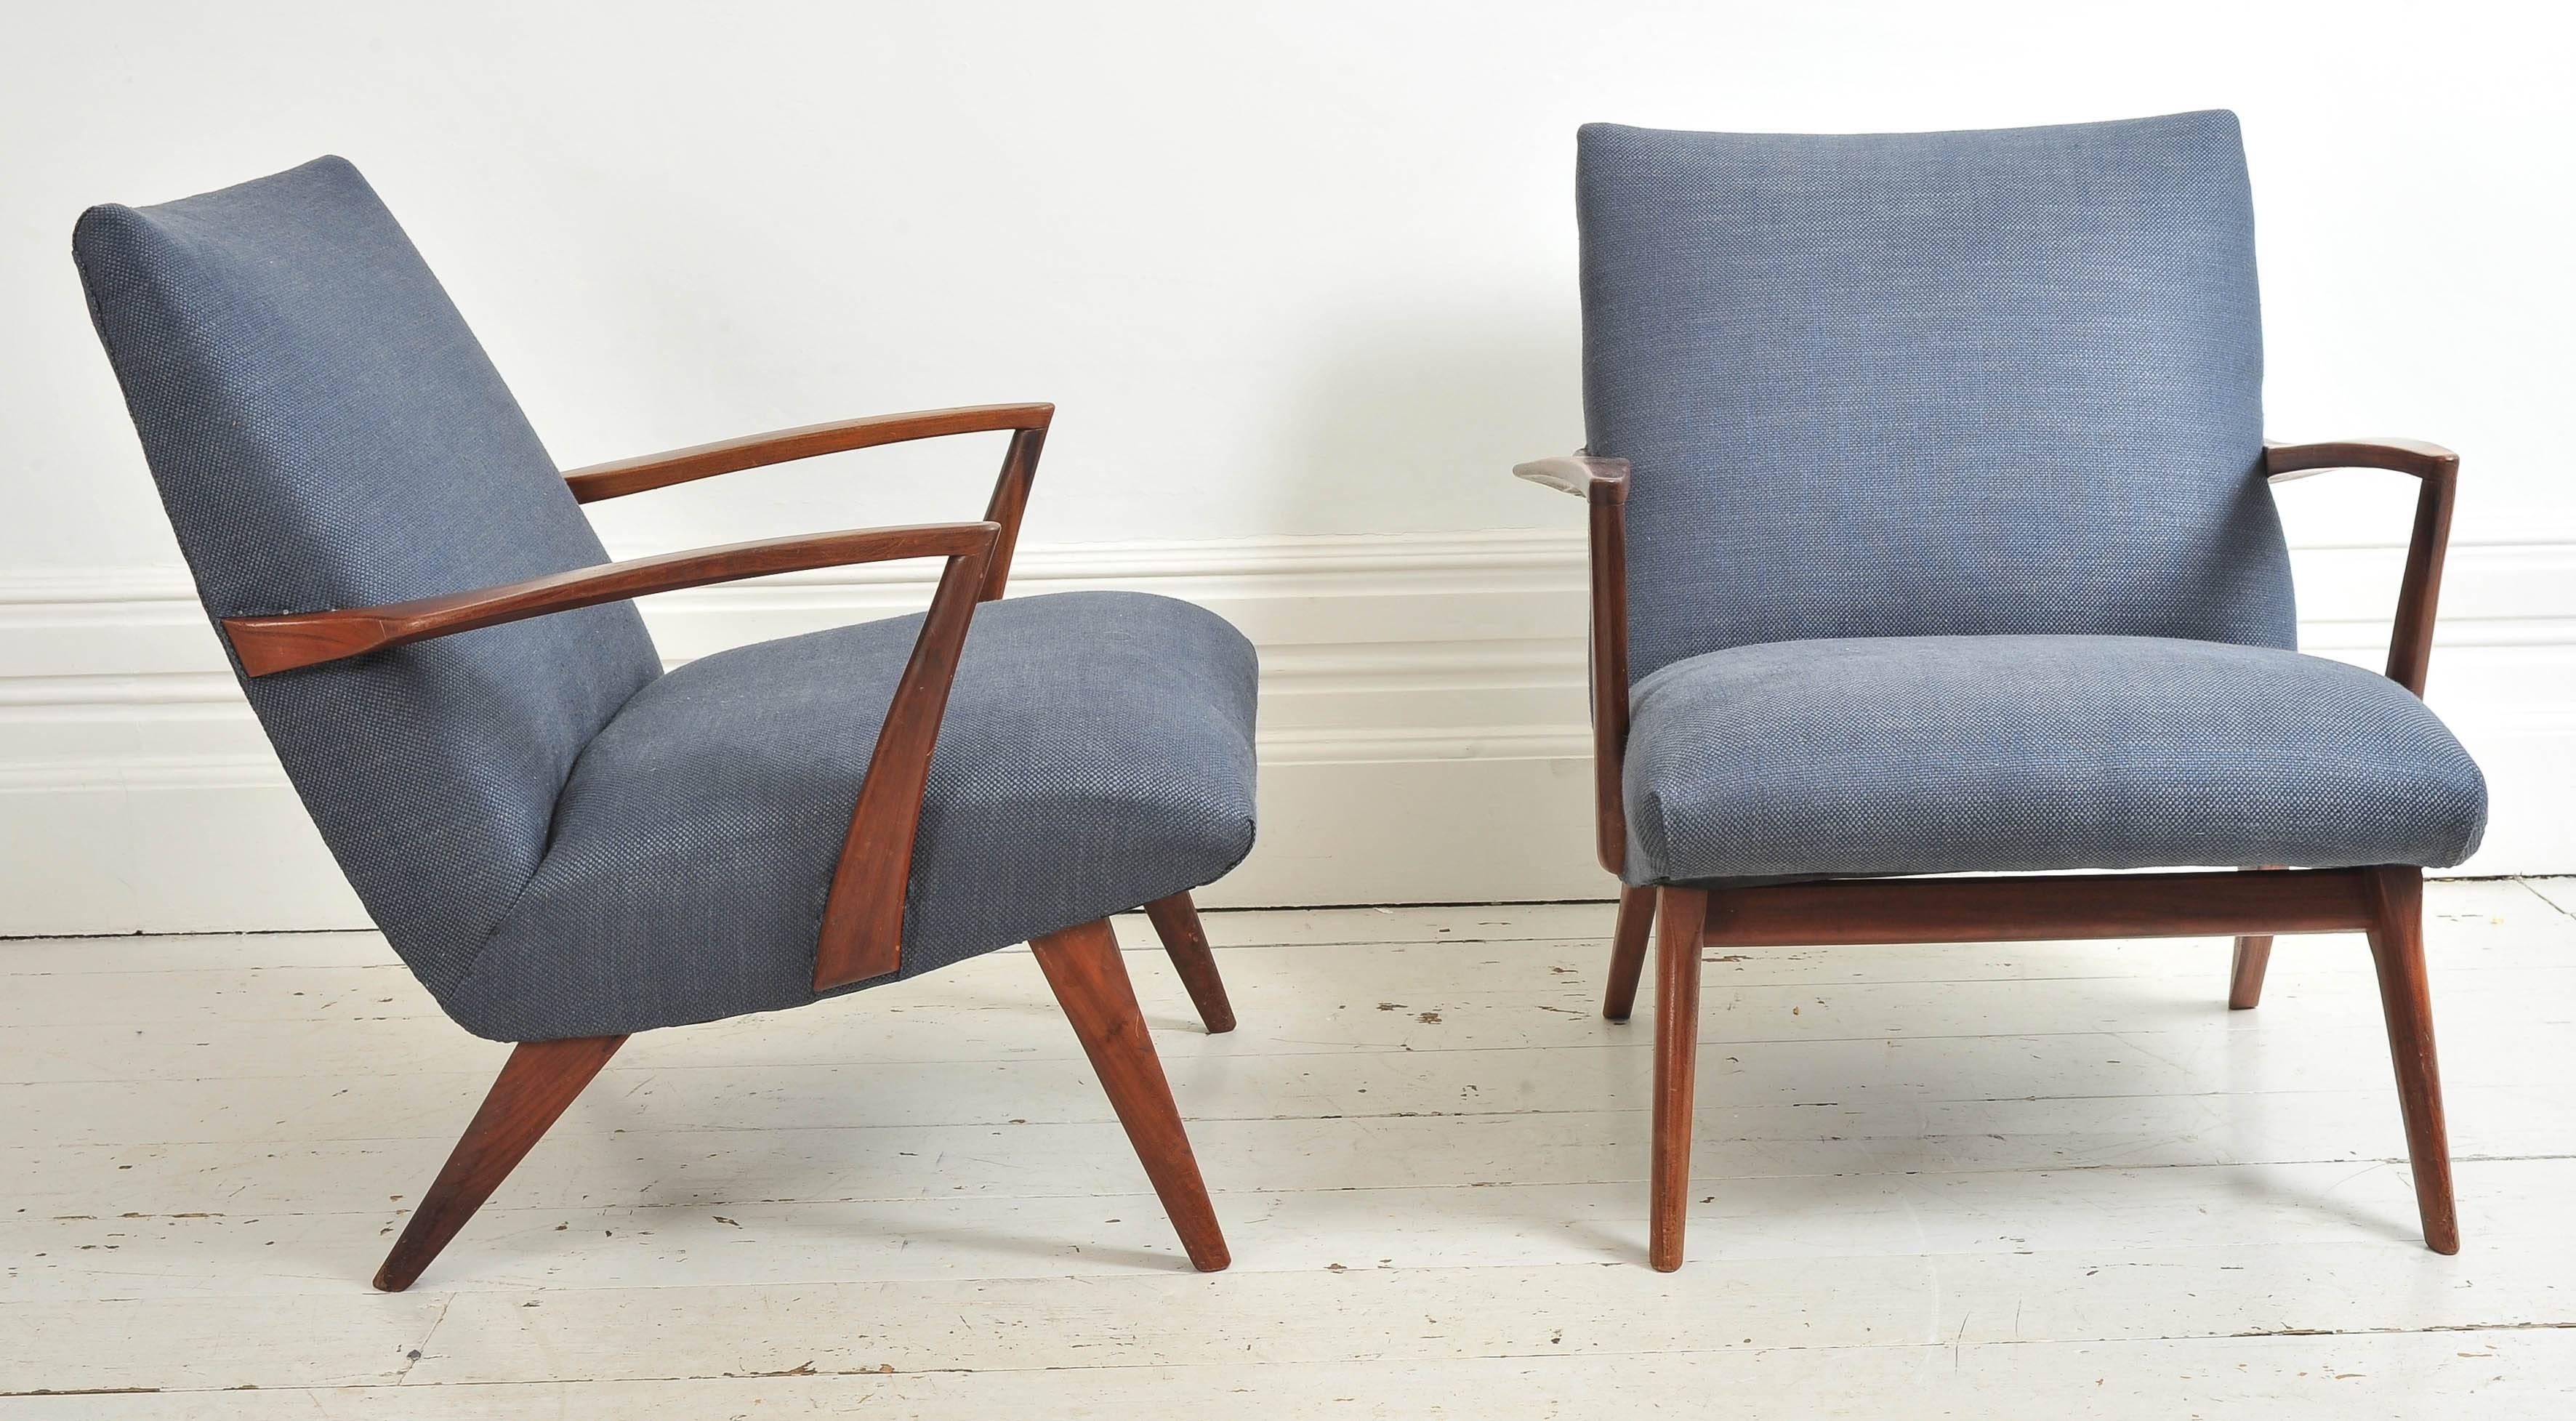 A pair of very stylish teak armchairs in the style of Poul Jensen.

We are happy to ship this item to you for an additional cost. Please contact us for a quote.